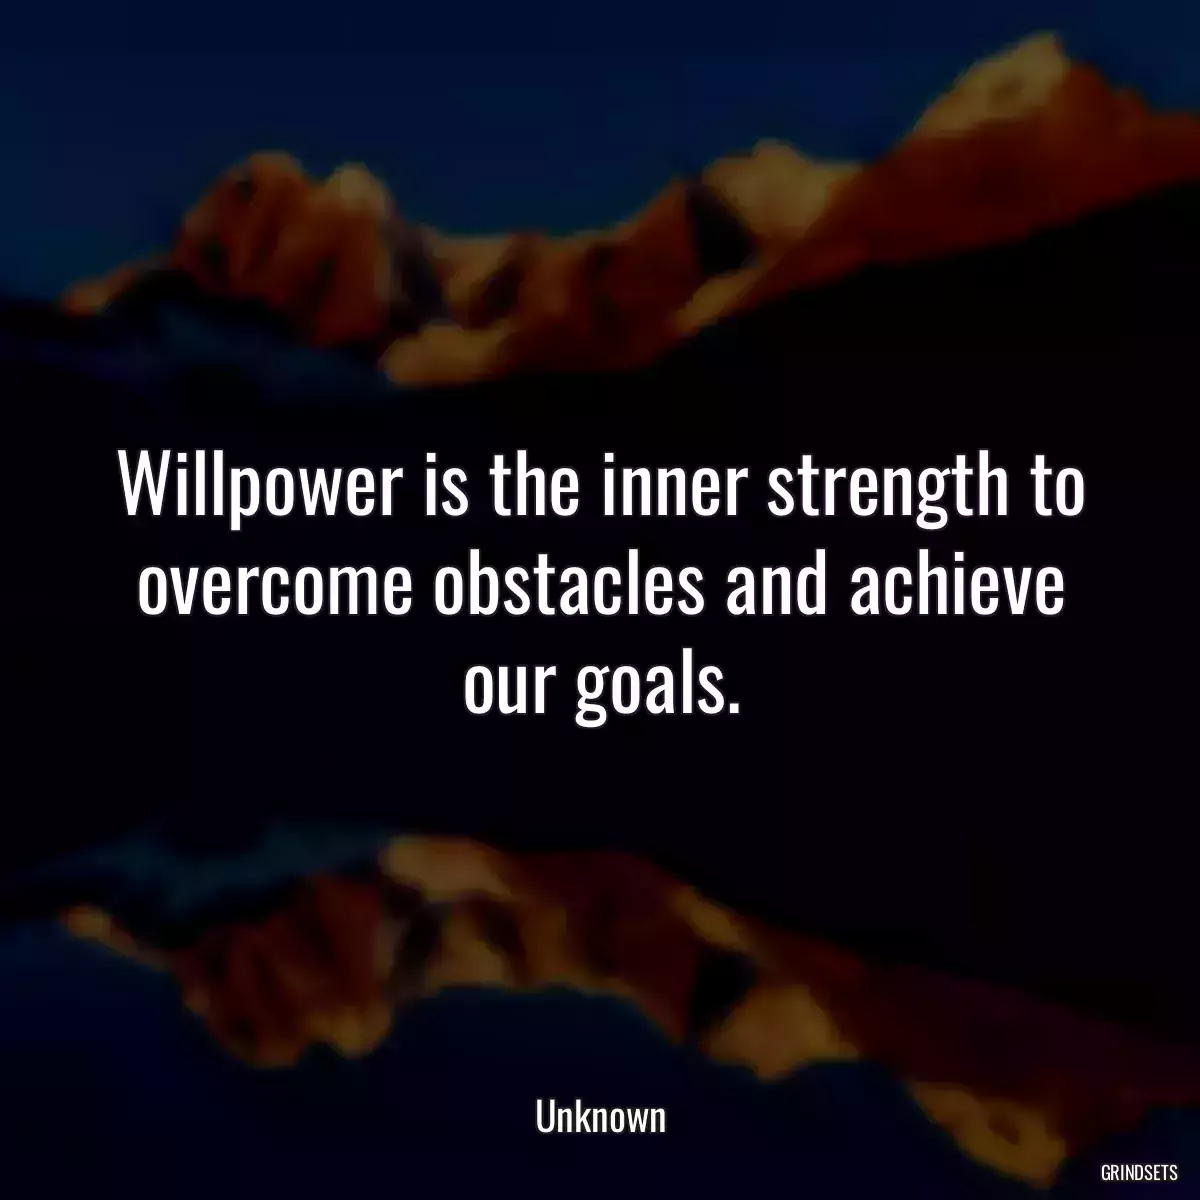 Willpower is the inner strength to overcome obstacles and achieve our goals.